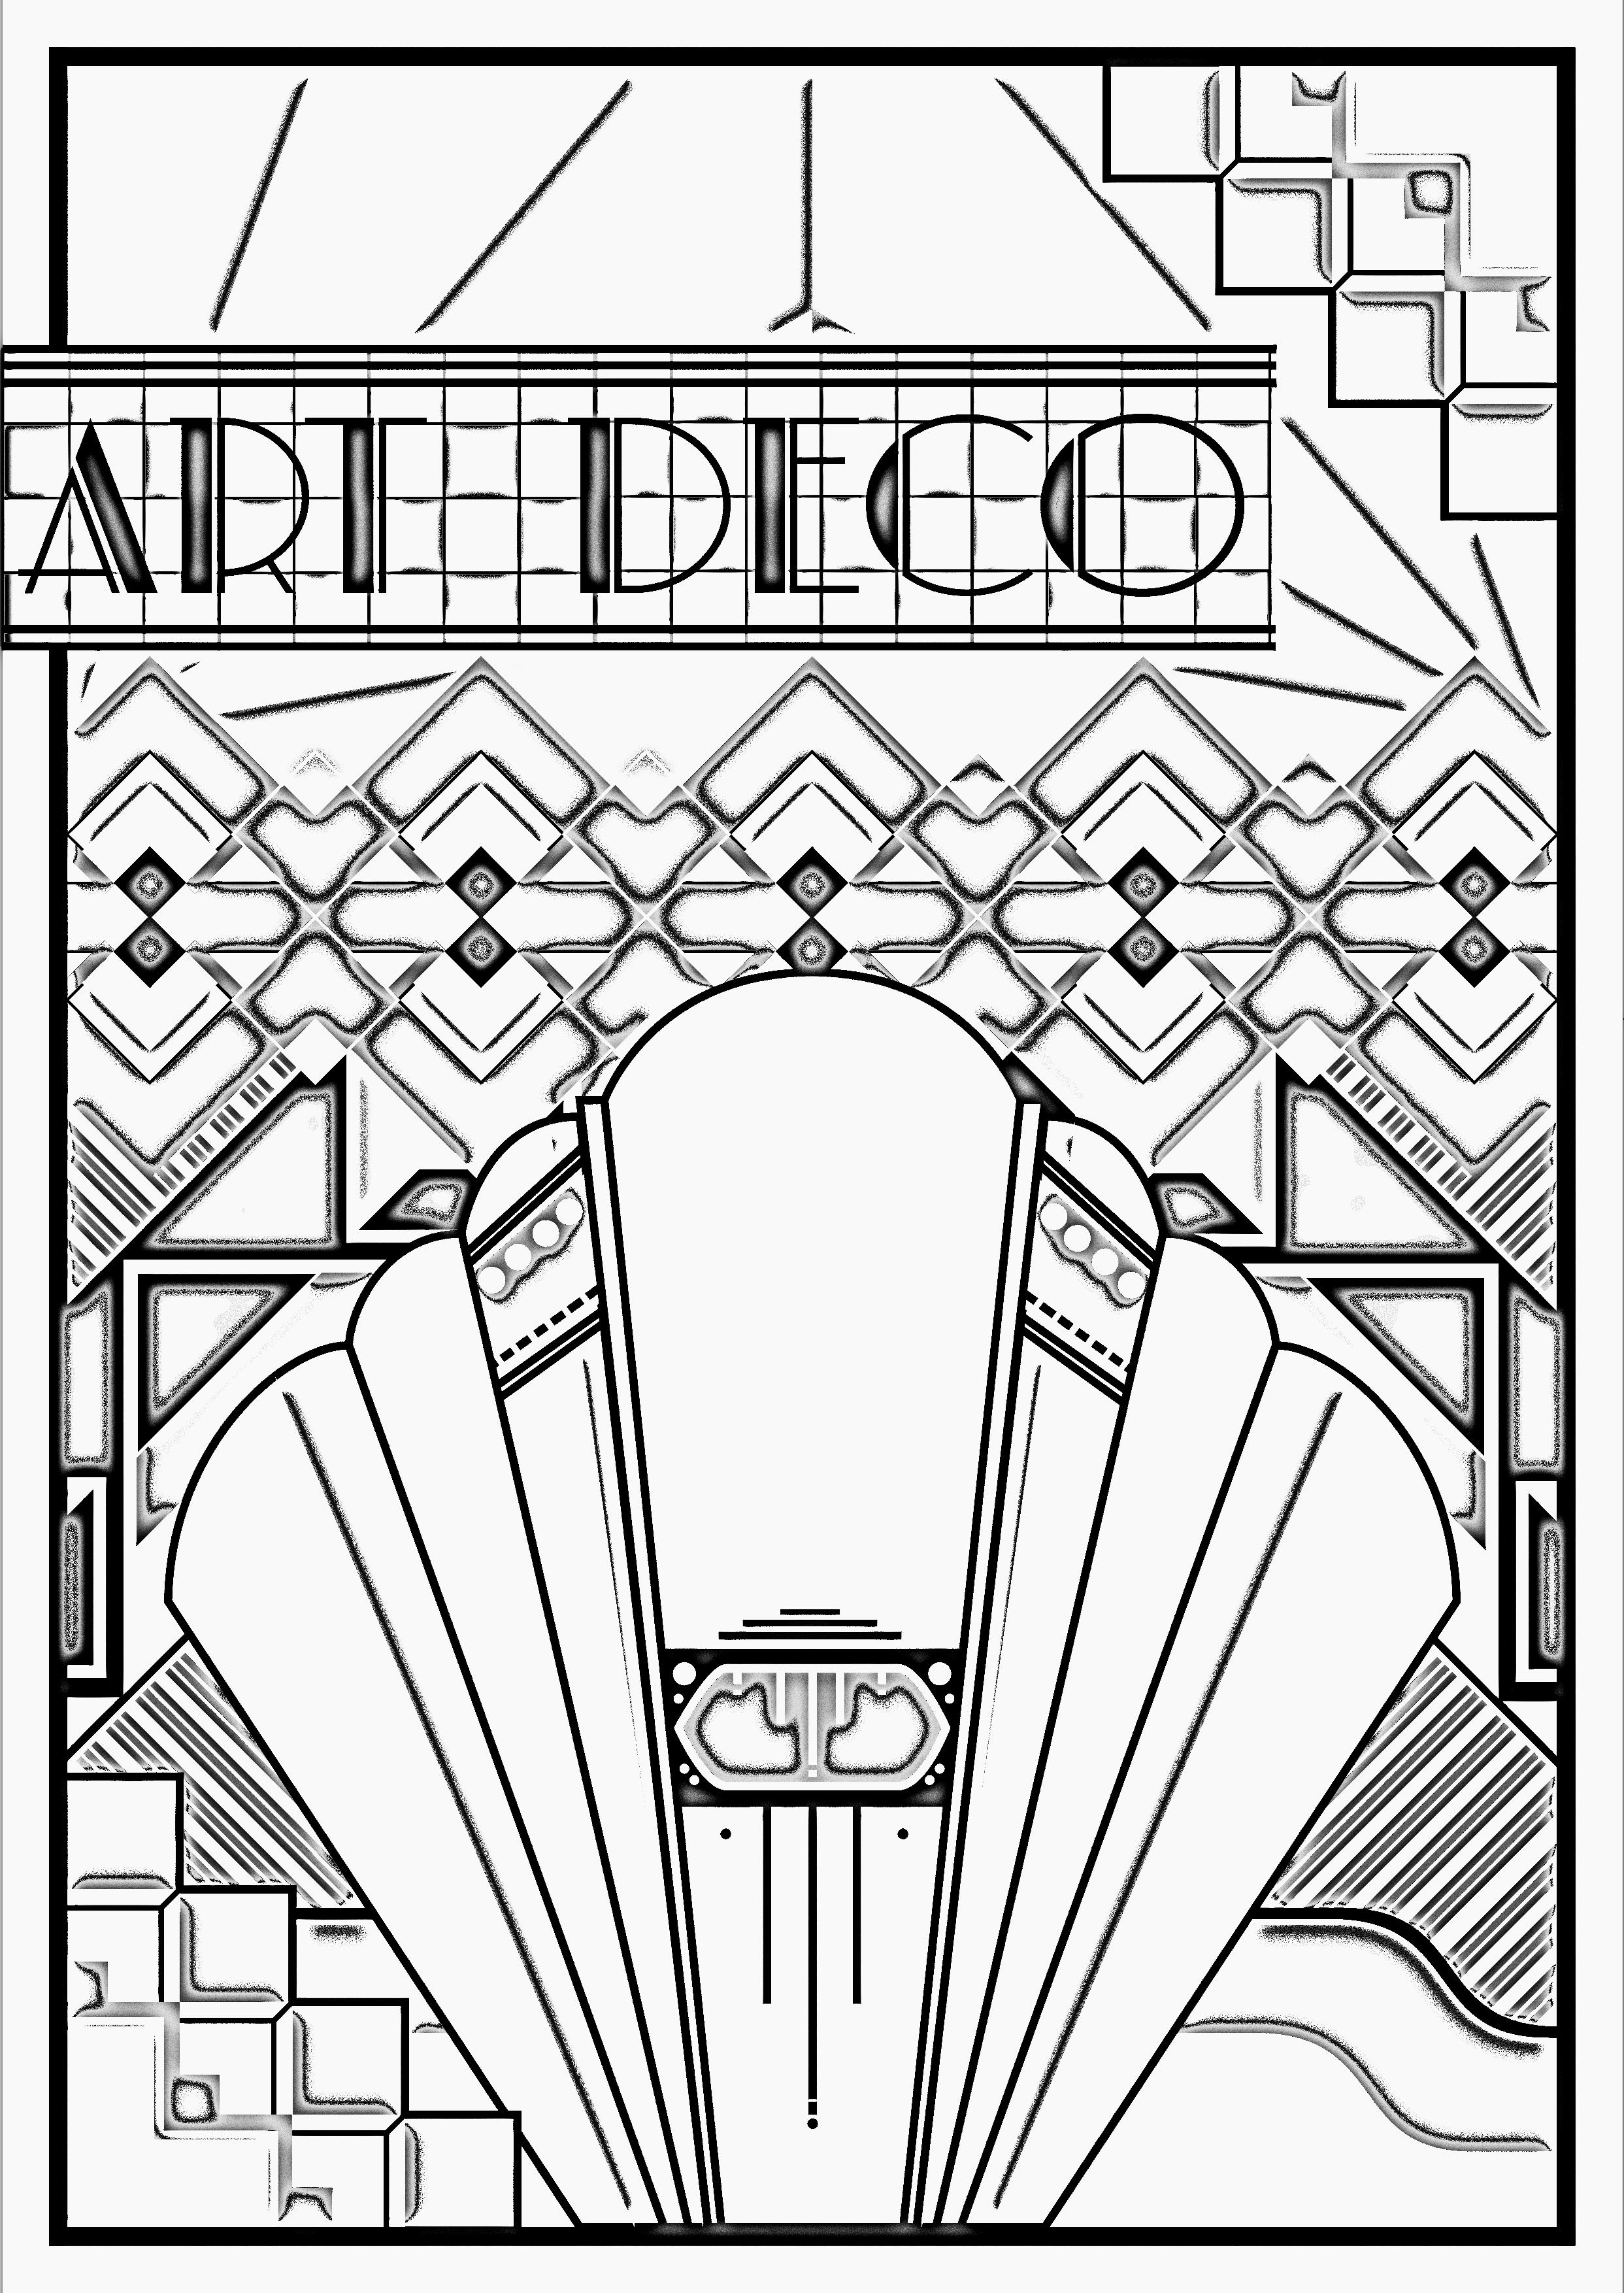 Art deco poster - Art Adult Coloring Pages